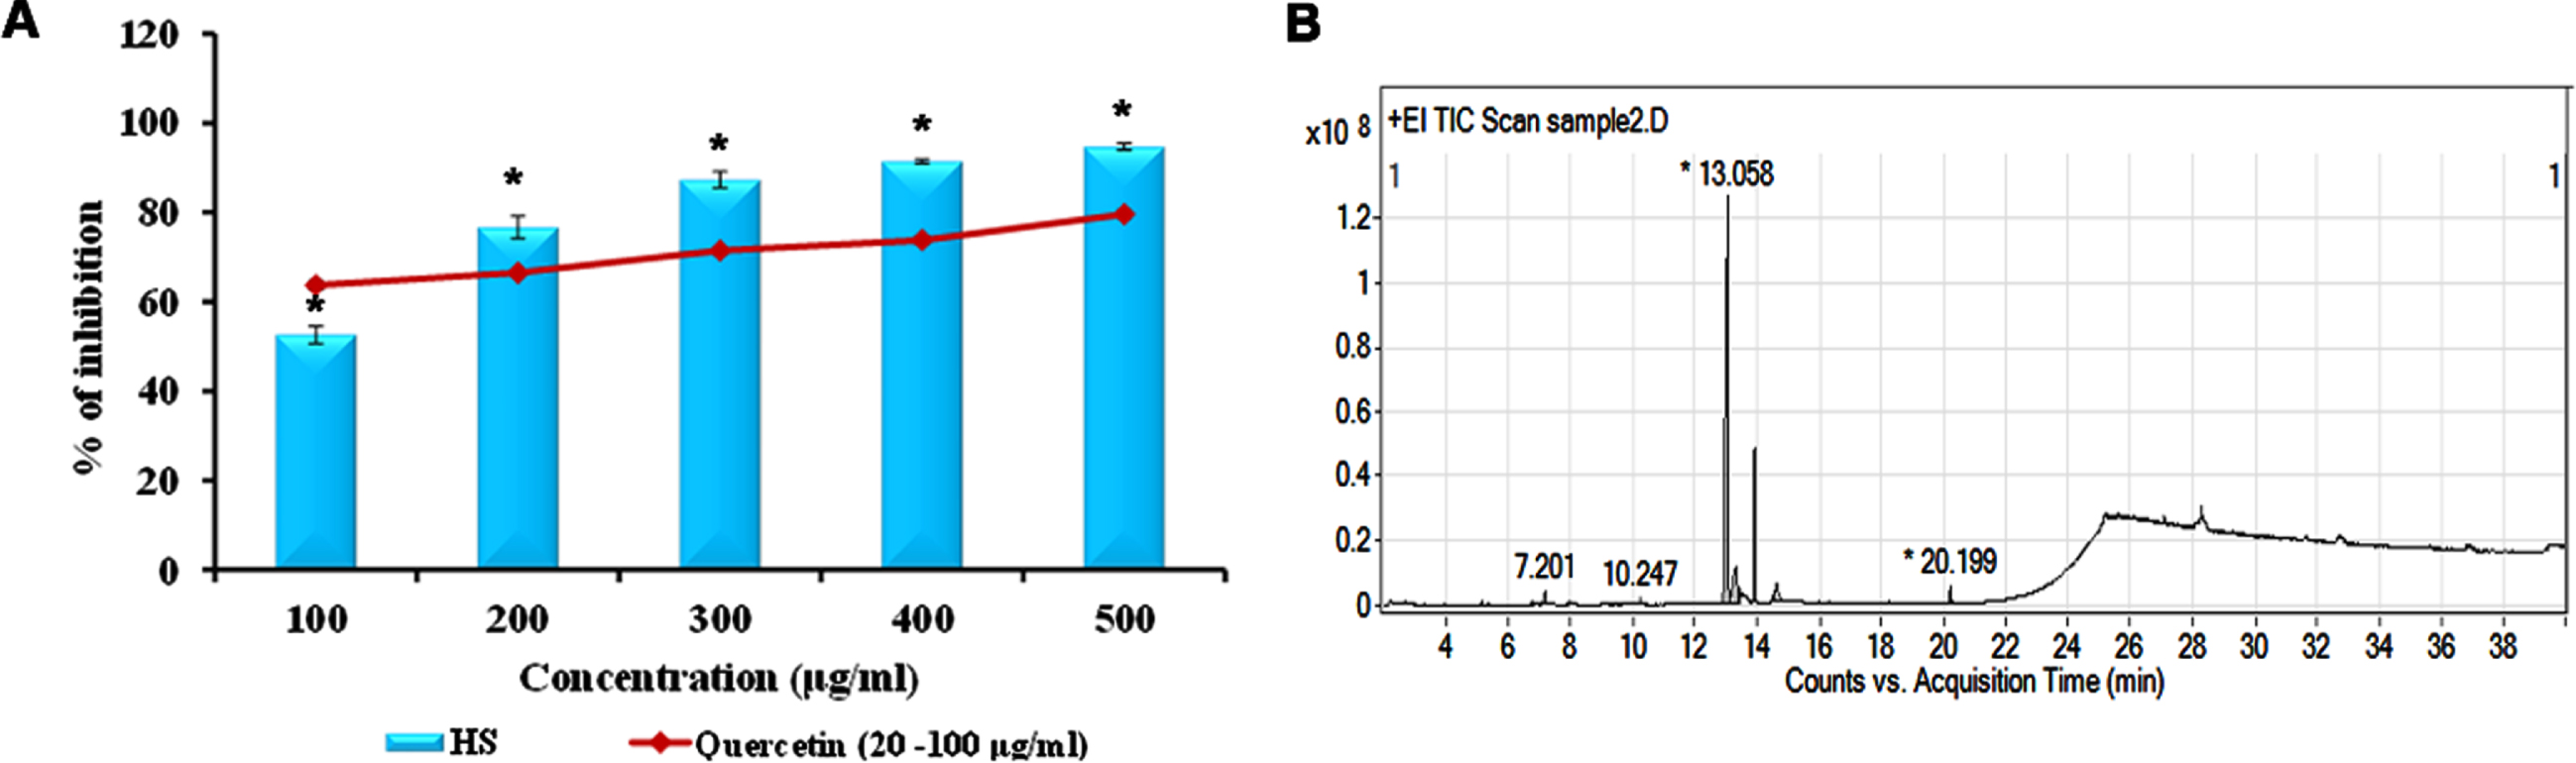 (A) Free radical scavenging of HS (100 –500μg/ml) in comparison to quercetin. (B) GC-MS spectral pattern of ethanol extract of HS (* significance at p < 0.05; n = 3).